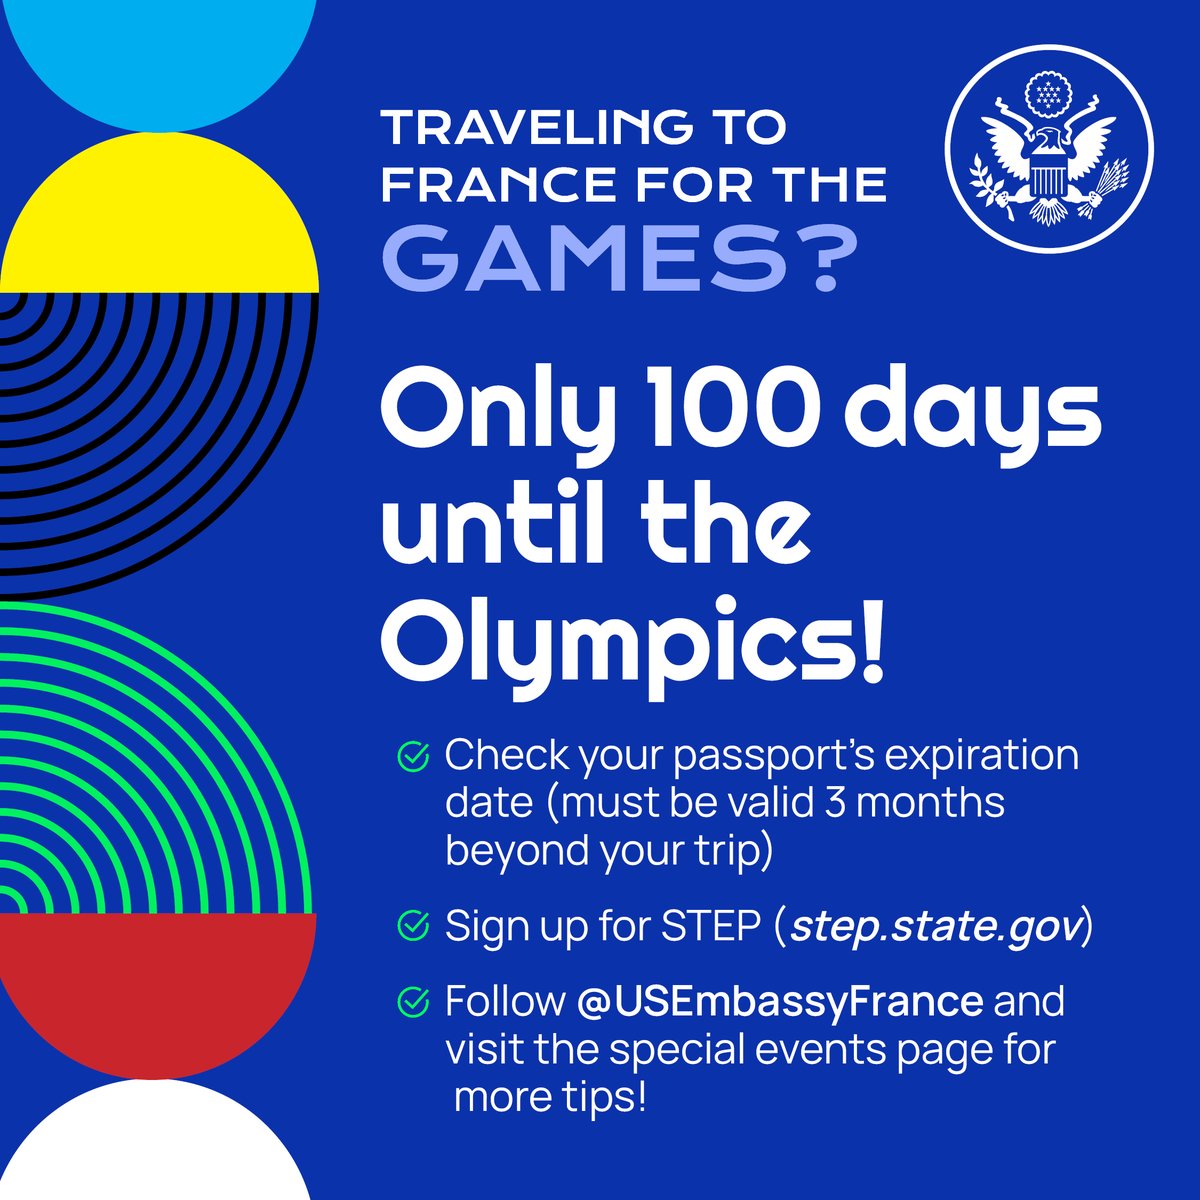 Only 100 days until the Olympics! Which event are you most excited to watch? If you're planning to travel for the Games, check your passport expiration date NOW and be sure to visit @USEmbassyFrance's events page for everything you need to need to know as you get ready for your